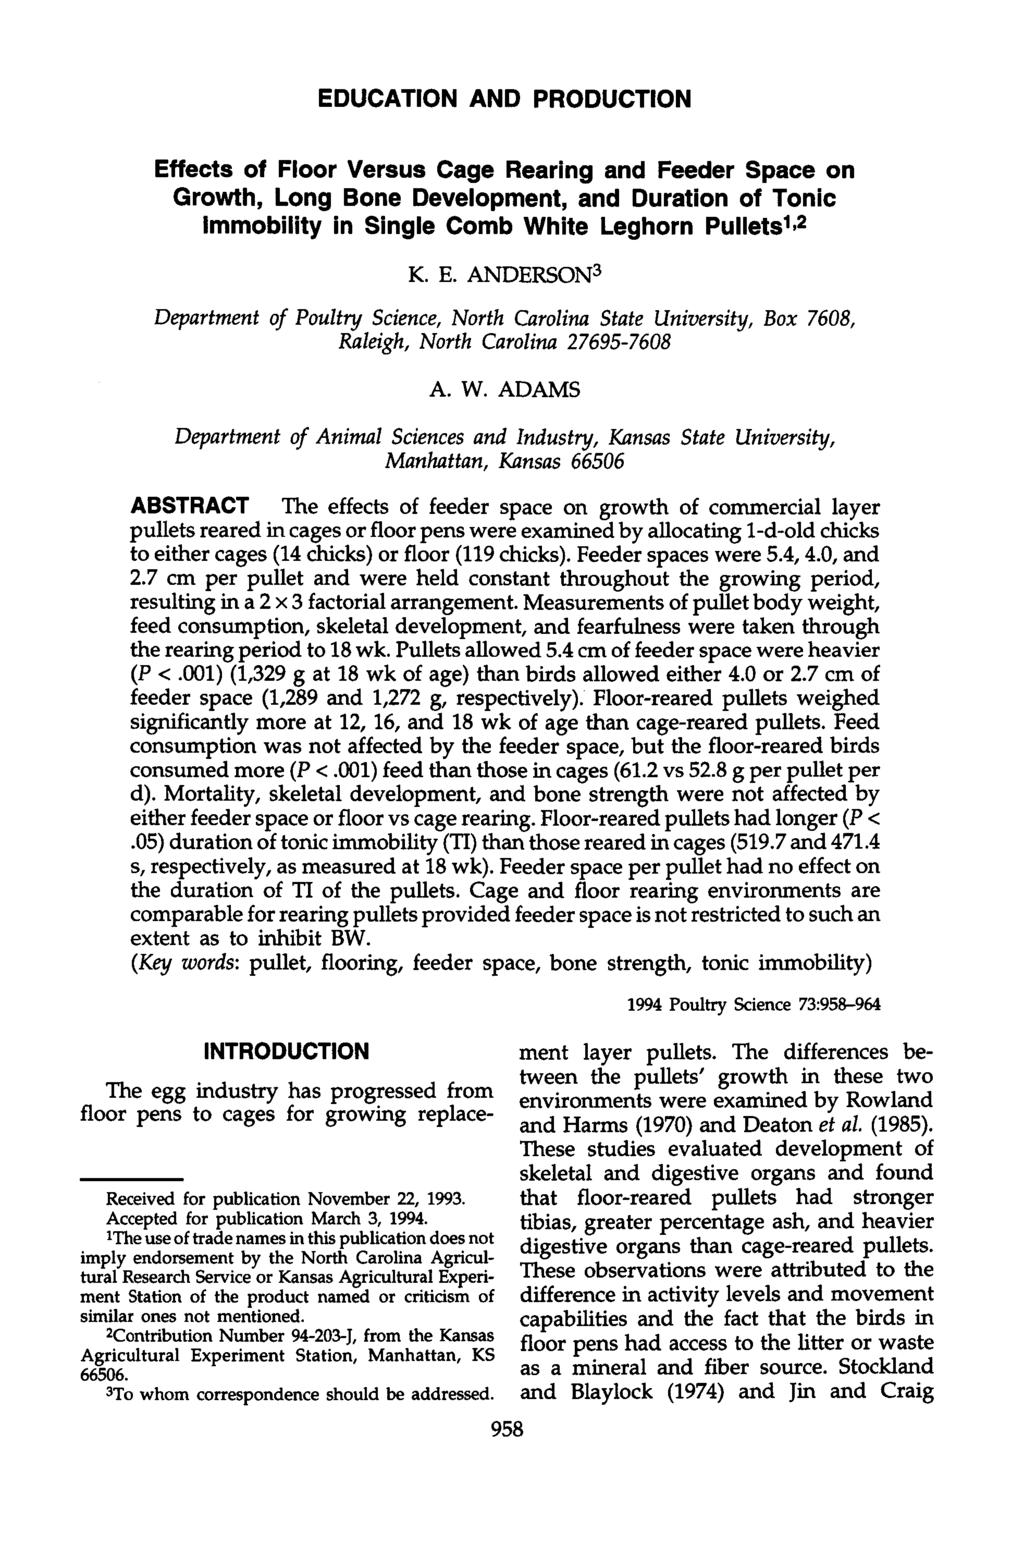 EDUCATION AND PRODUCTION Effects of Floor Versus Cage Rearing and Feeder Space on Growth, Long Bone Development, and Duration of Tonic Immobility in Single Comb White Leghorn Pullets 1 ' 2 K. E. ANDERSON 3 Department of Poultry Science, North Carolina State University, Box 7608, Raleigh, North Carolina 27695-7608 A.